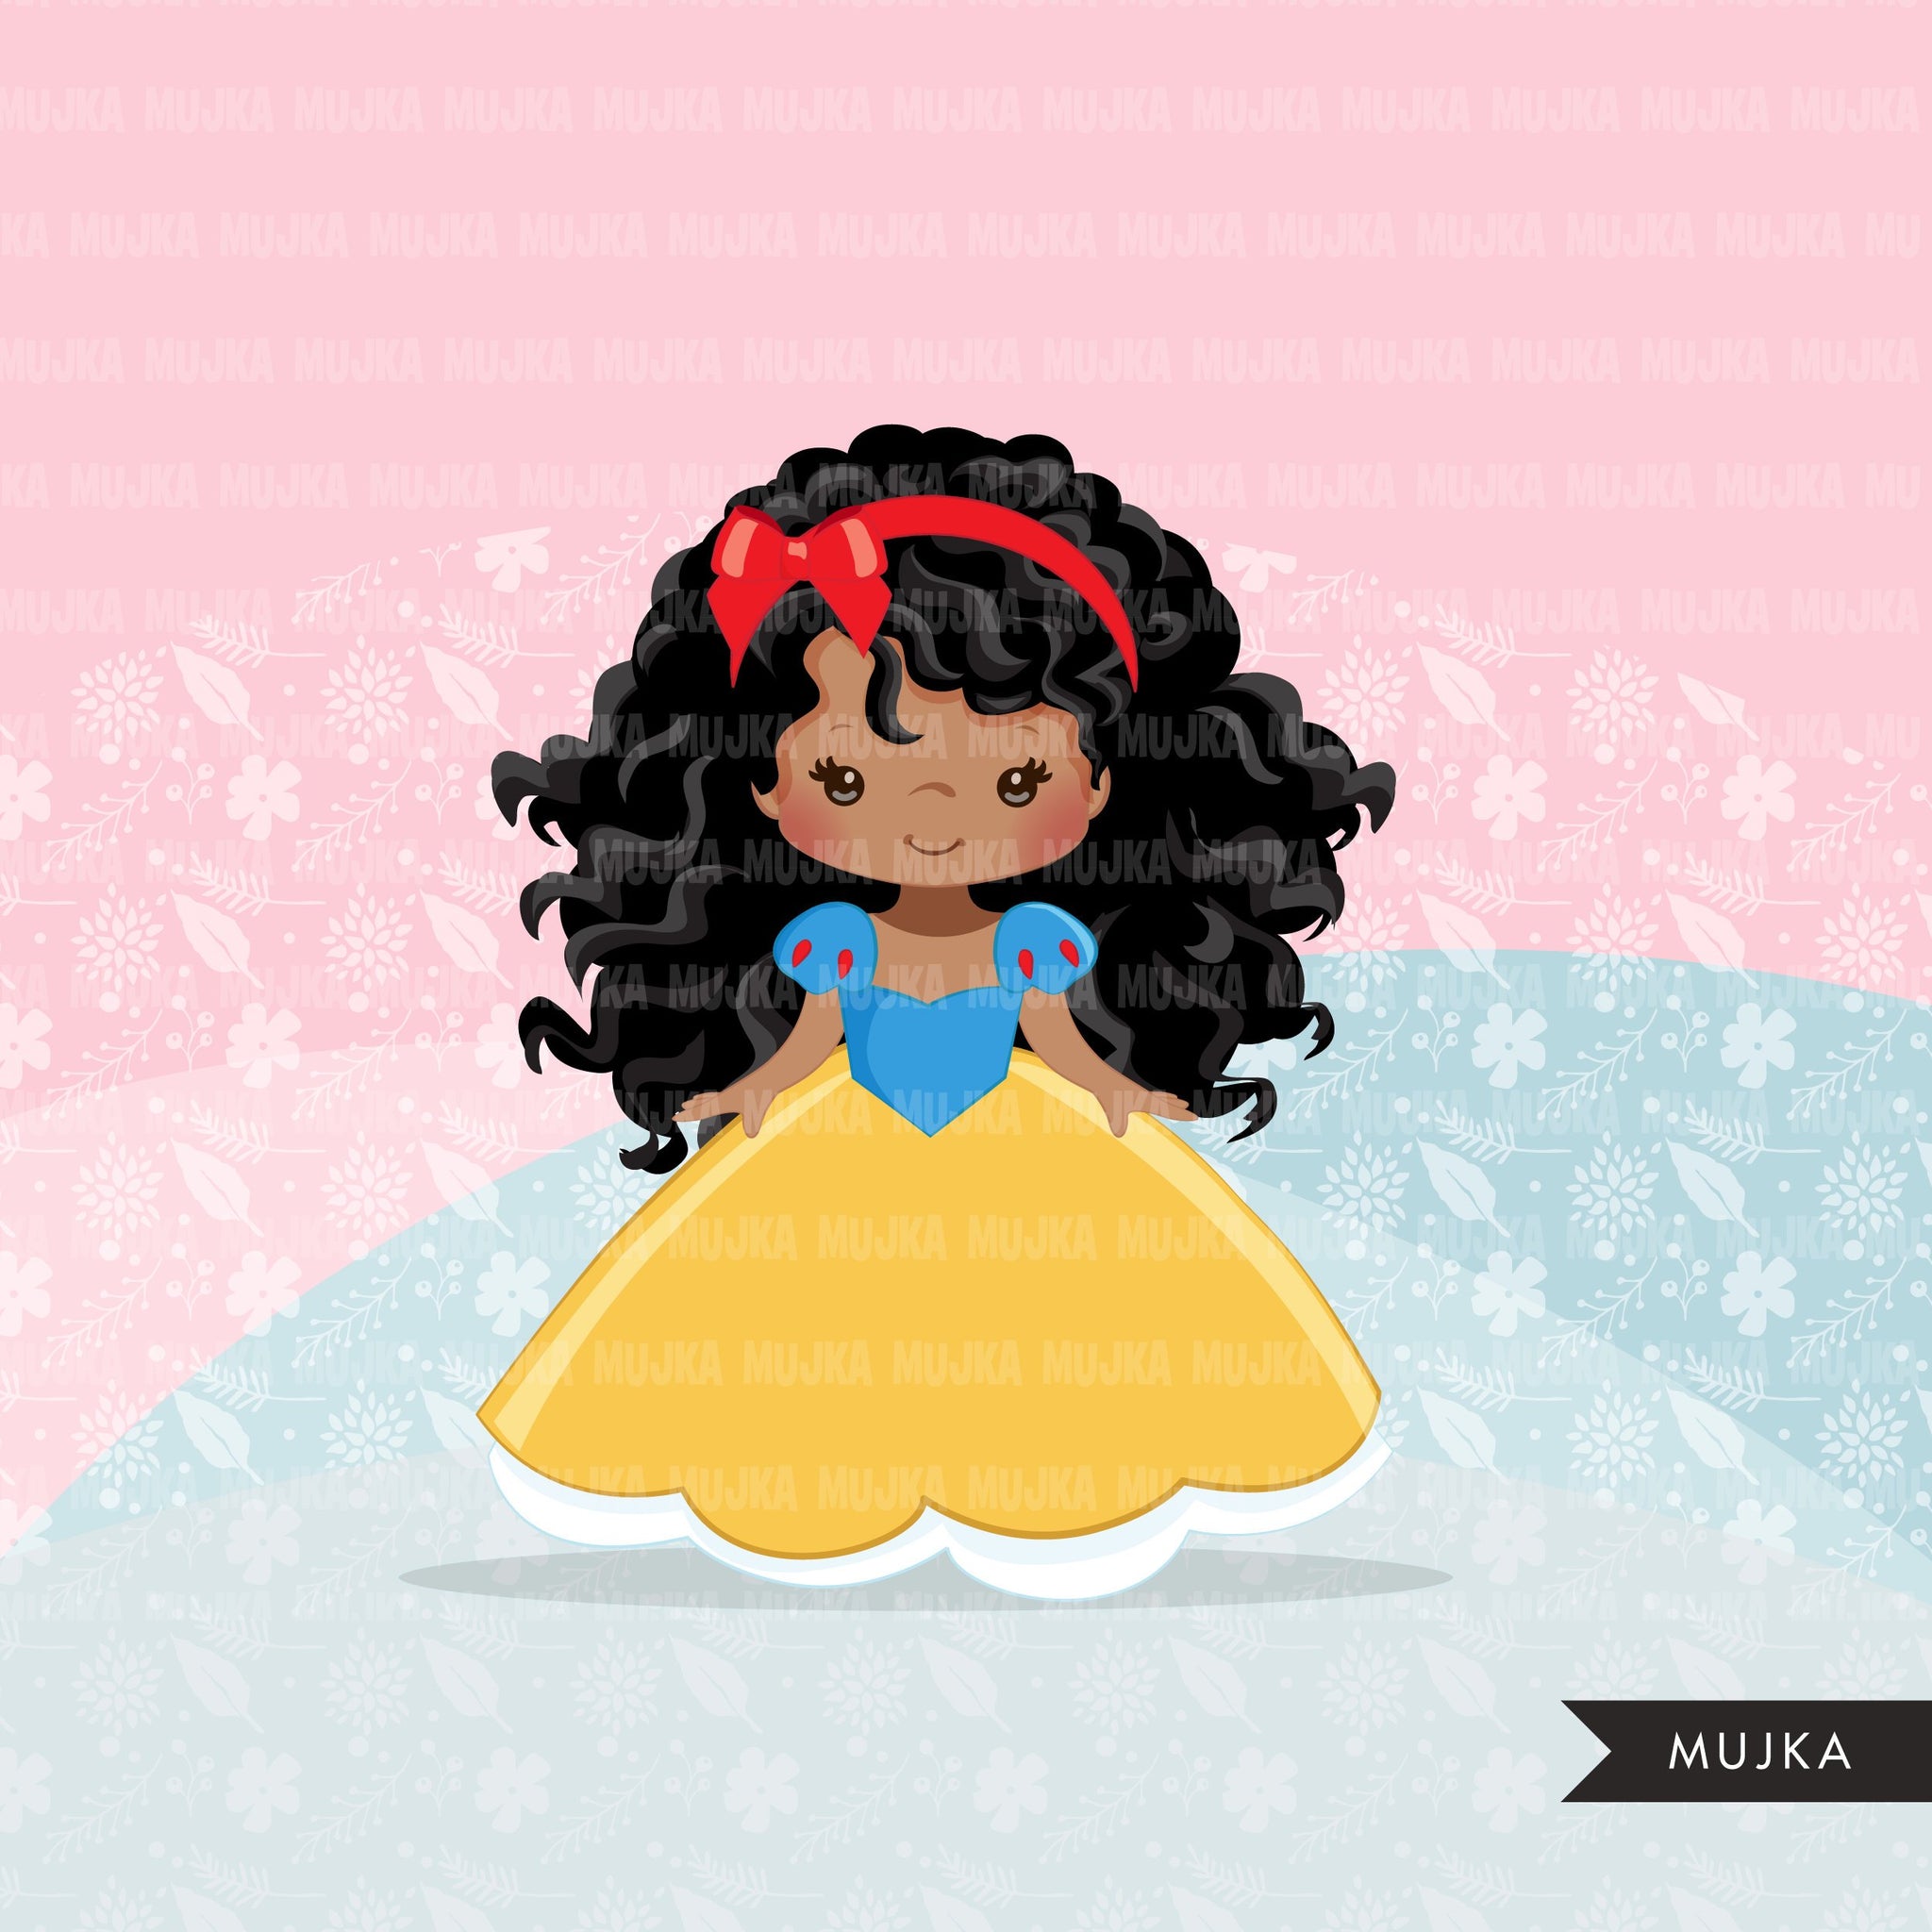 Black Princess clipart, fairy tale graphics, girls story book, red, blue, yellow princess dress, personal use clip art